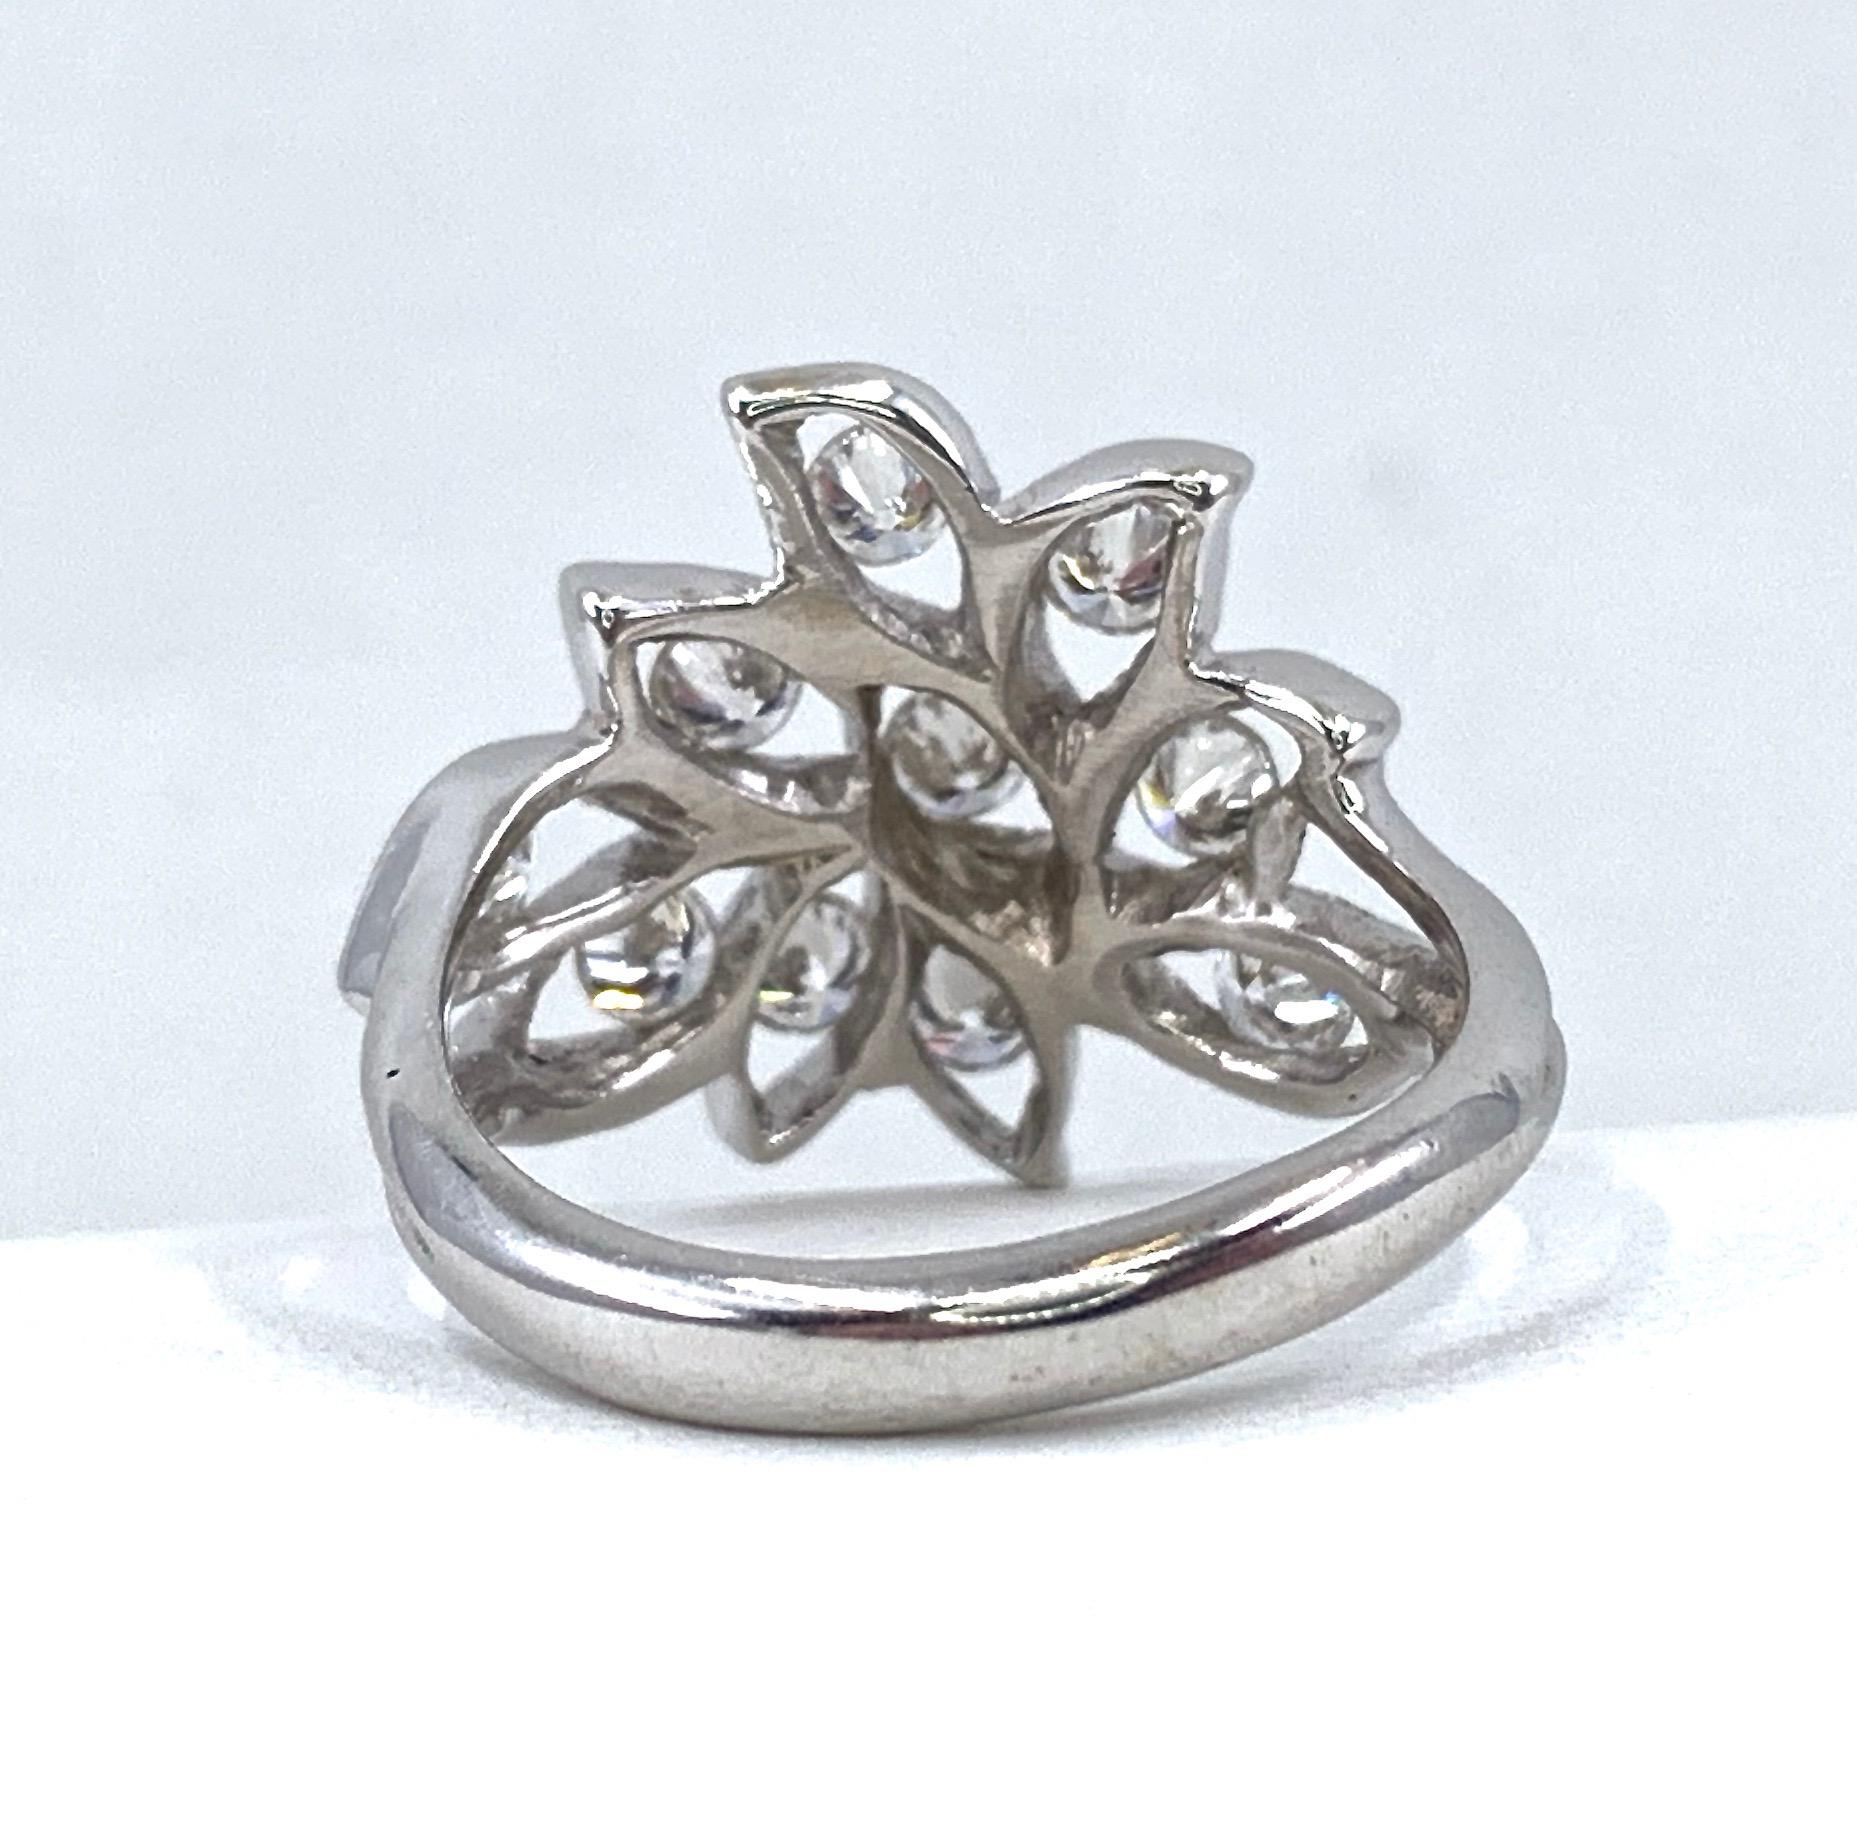 0.80 Carat Abstract Openwork Leafy Diamond Ring in 18 Karat White Gold In Excellent Condition For Sale In Sherman Oaks, CA